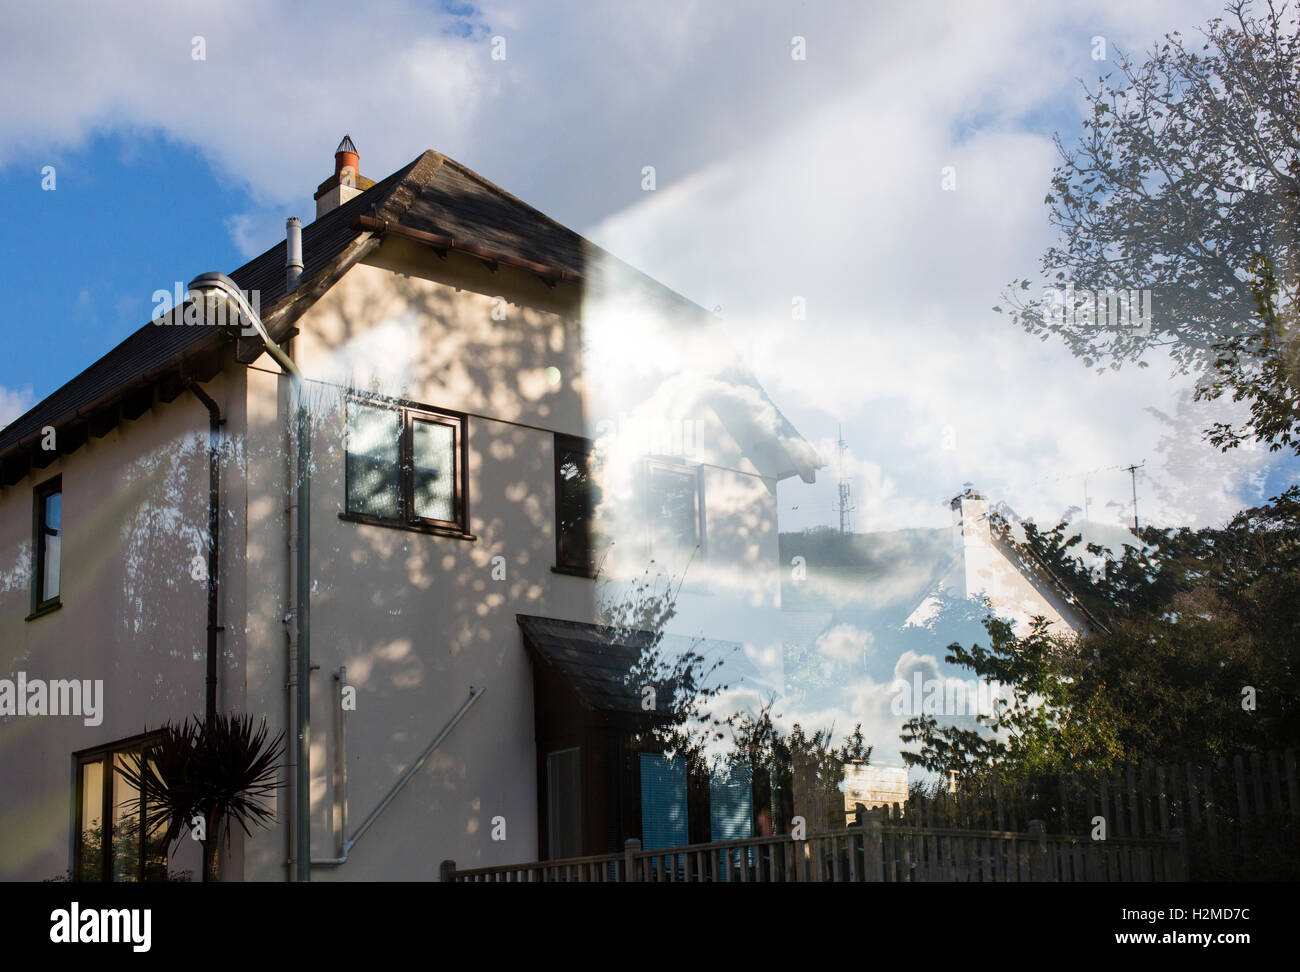 Reflections on a window looking from the inside to the outside on a UK housing estate. Stock Photo